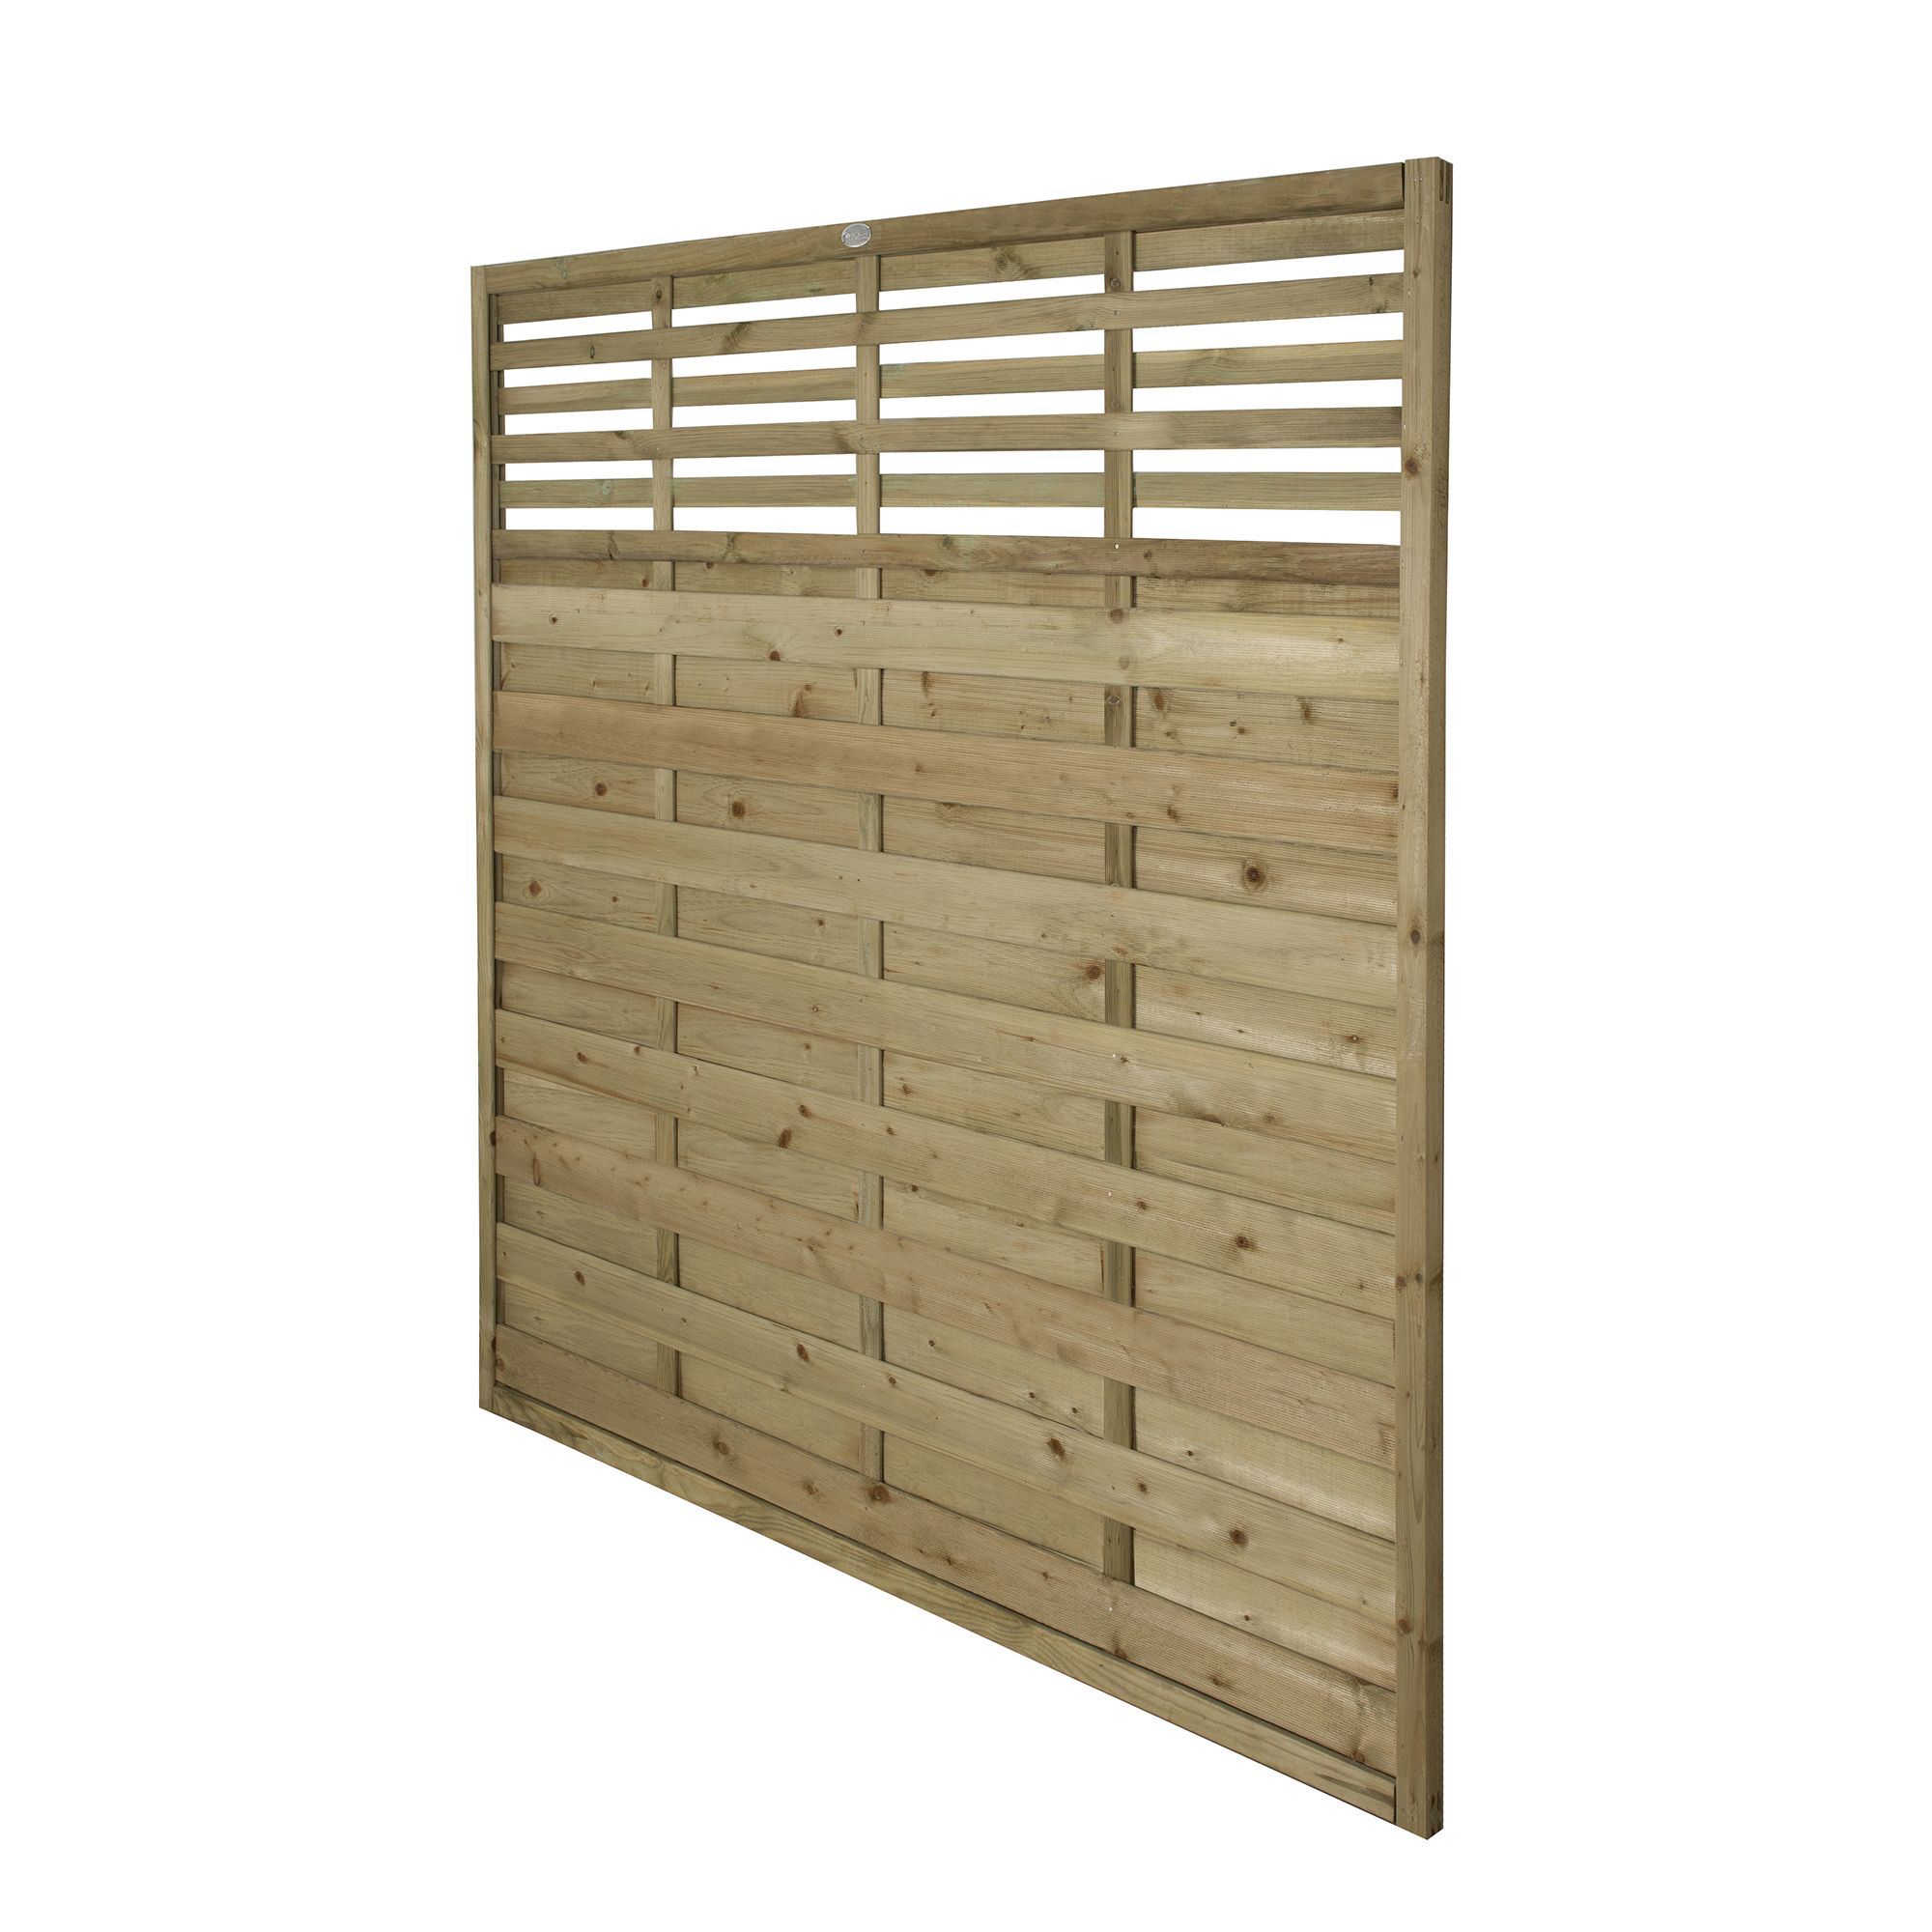 Forest Garden Contemporary Slatted Pressure treated Wooden Fence panel (W)1.8m (H)1.8m, Pack of 5